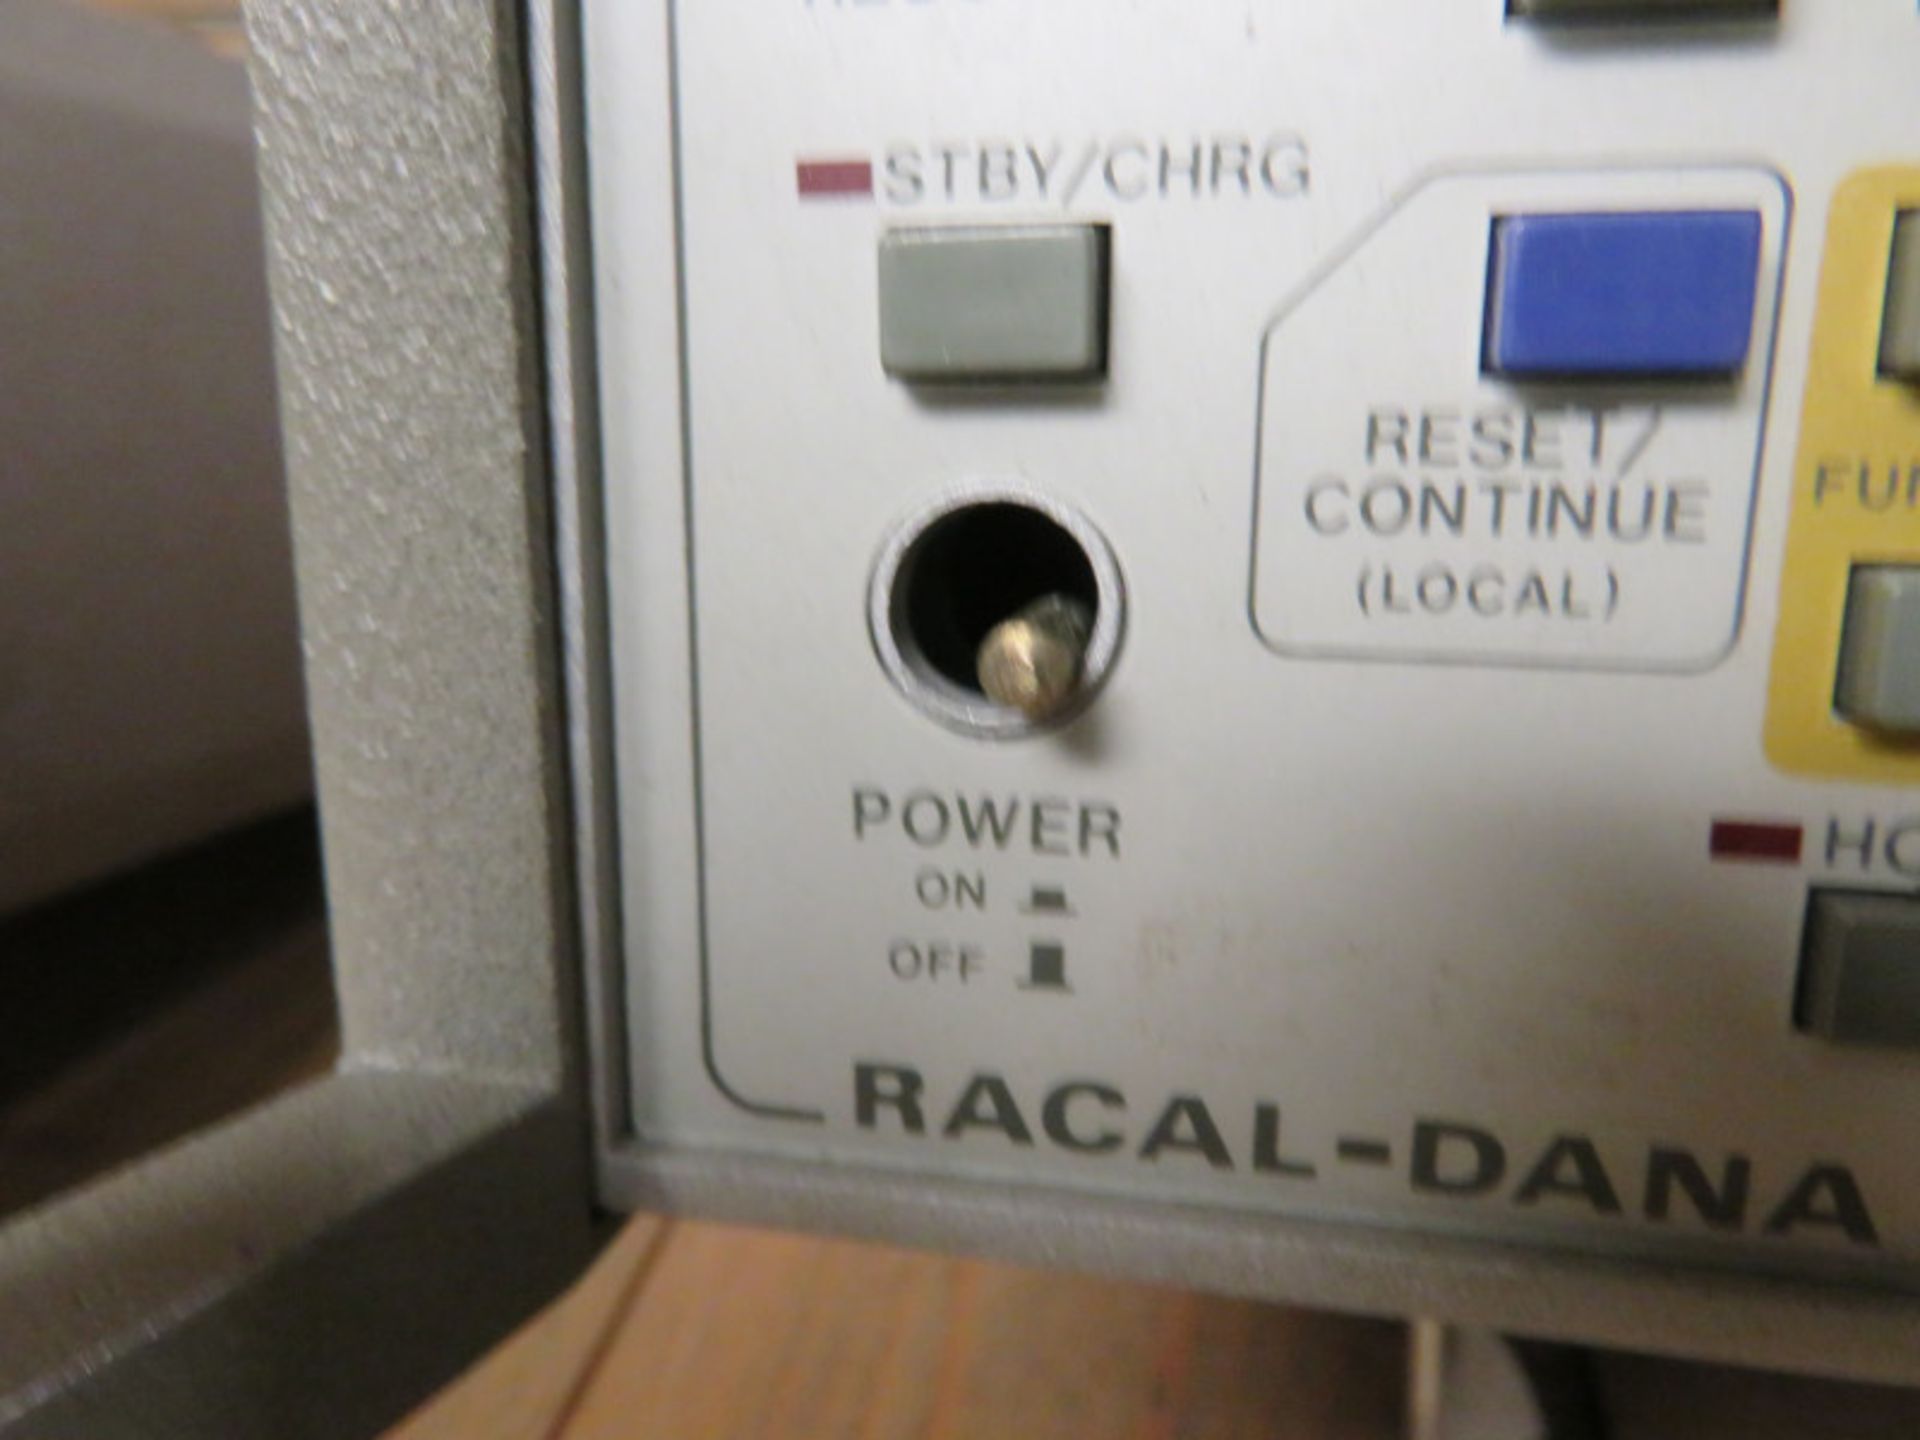 Racal-Dana 1998 Frequency Counter - Missing Power Button & Dent to Top - Image 2 of 3